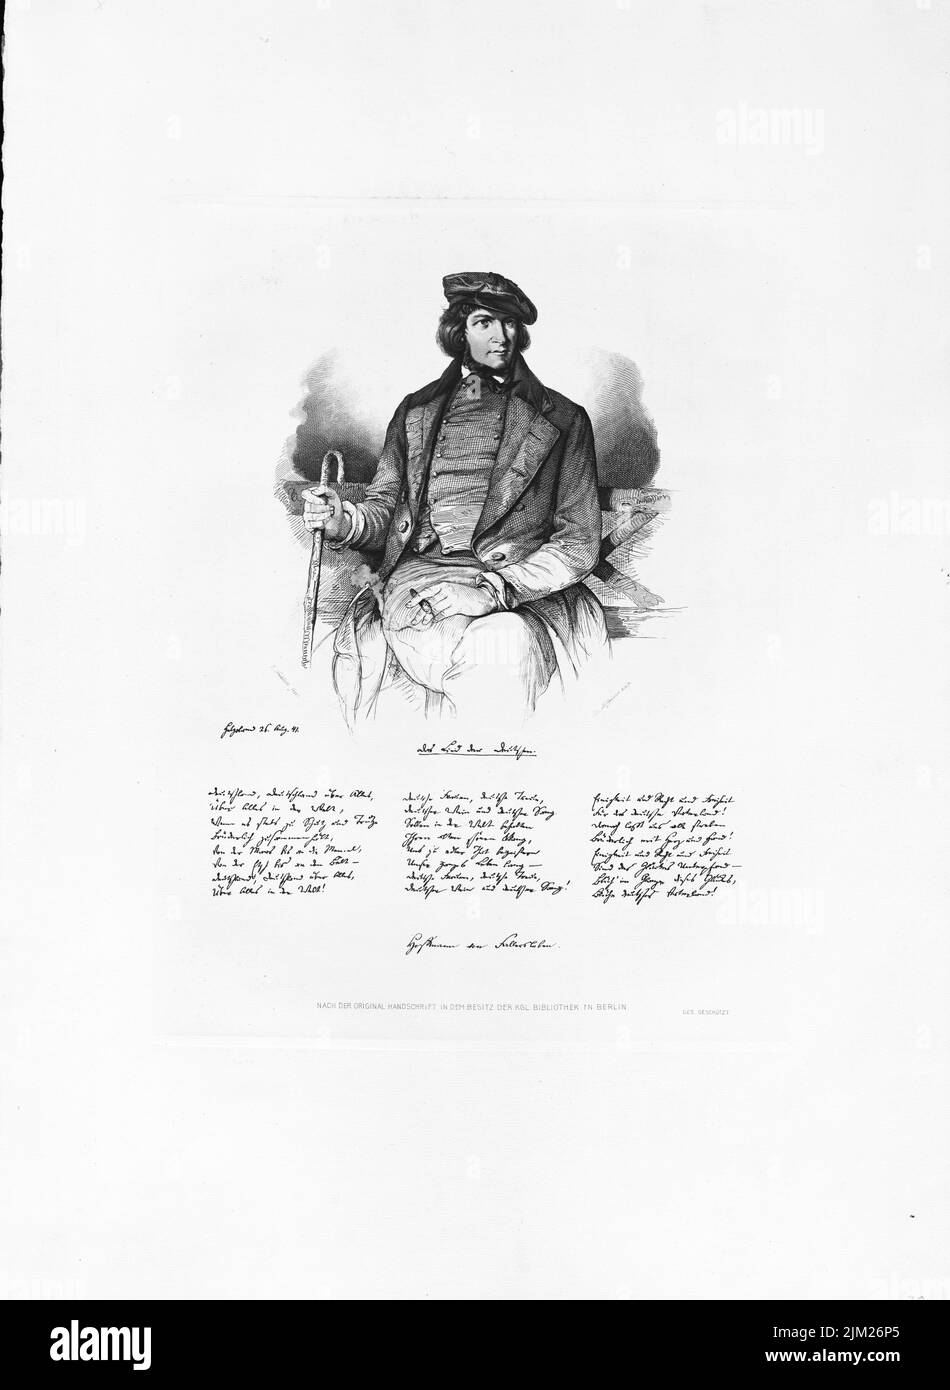 Portrait of August Heinrich Hoffmann von Fallersleben (1798-1874) and facsimile of the Song of the Germans. Museum: PRIVATE COLLECTION. Author: Christian Hoffmeister. Stock Photo